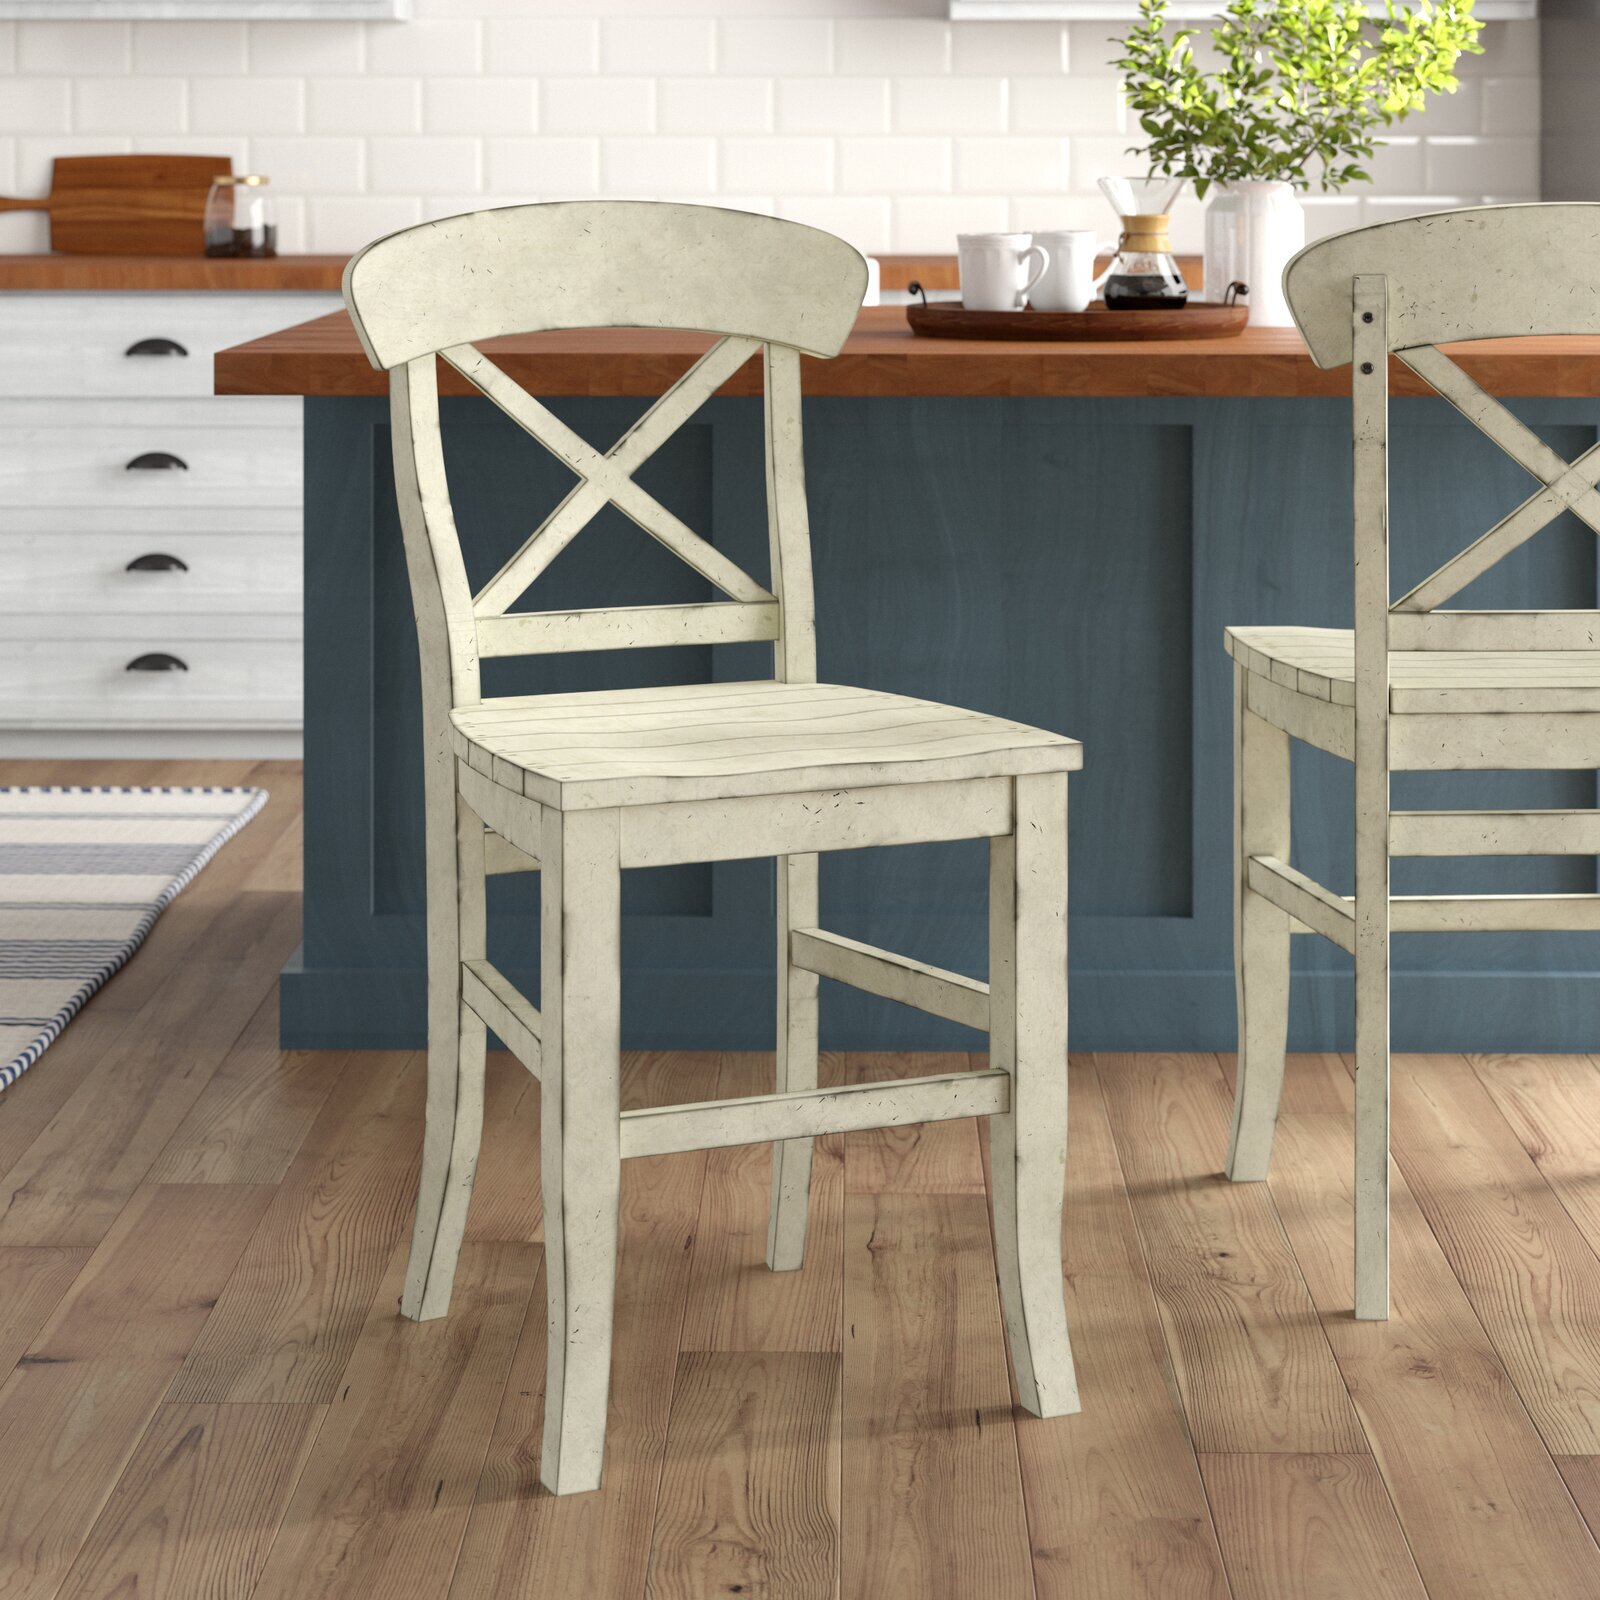 French provincial counter stools